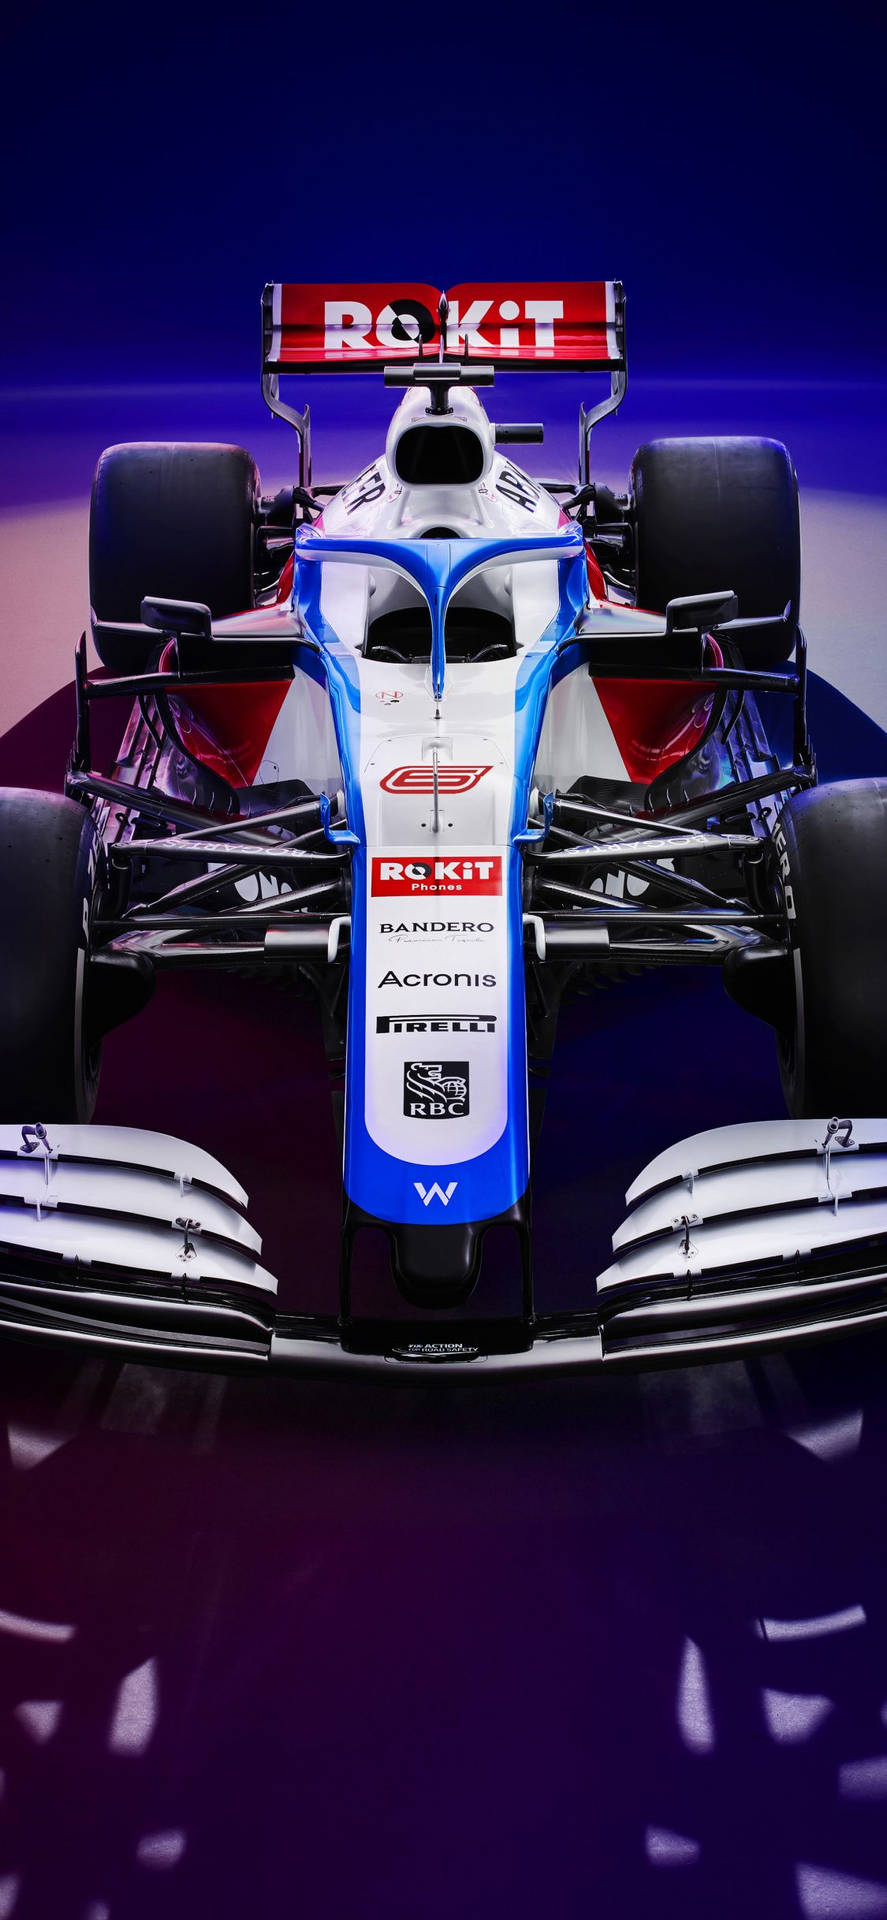 Williams Car With Red Wing Wallpaper